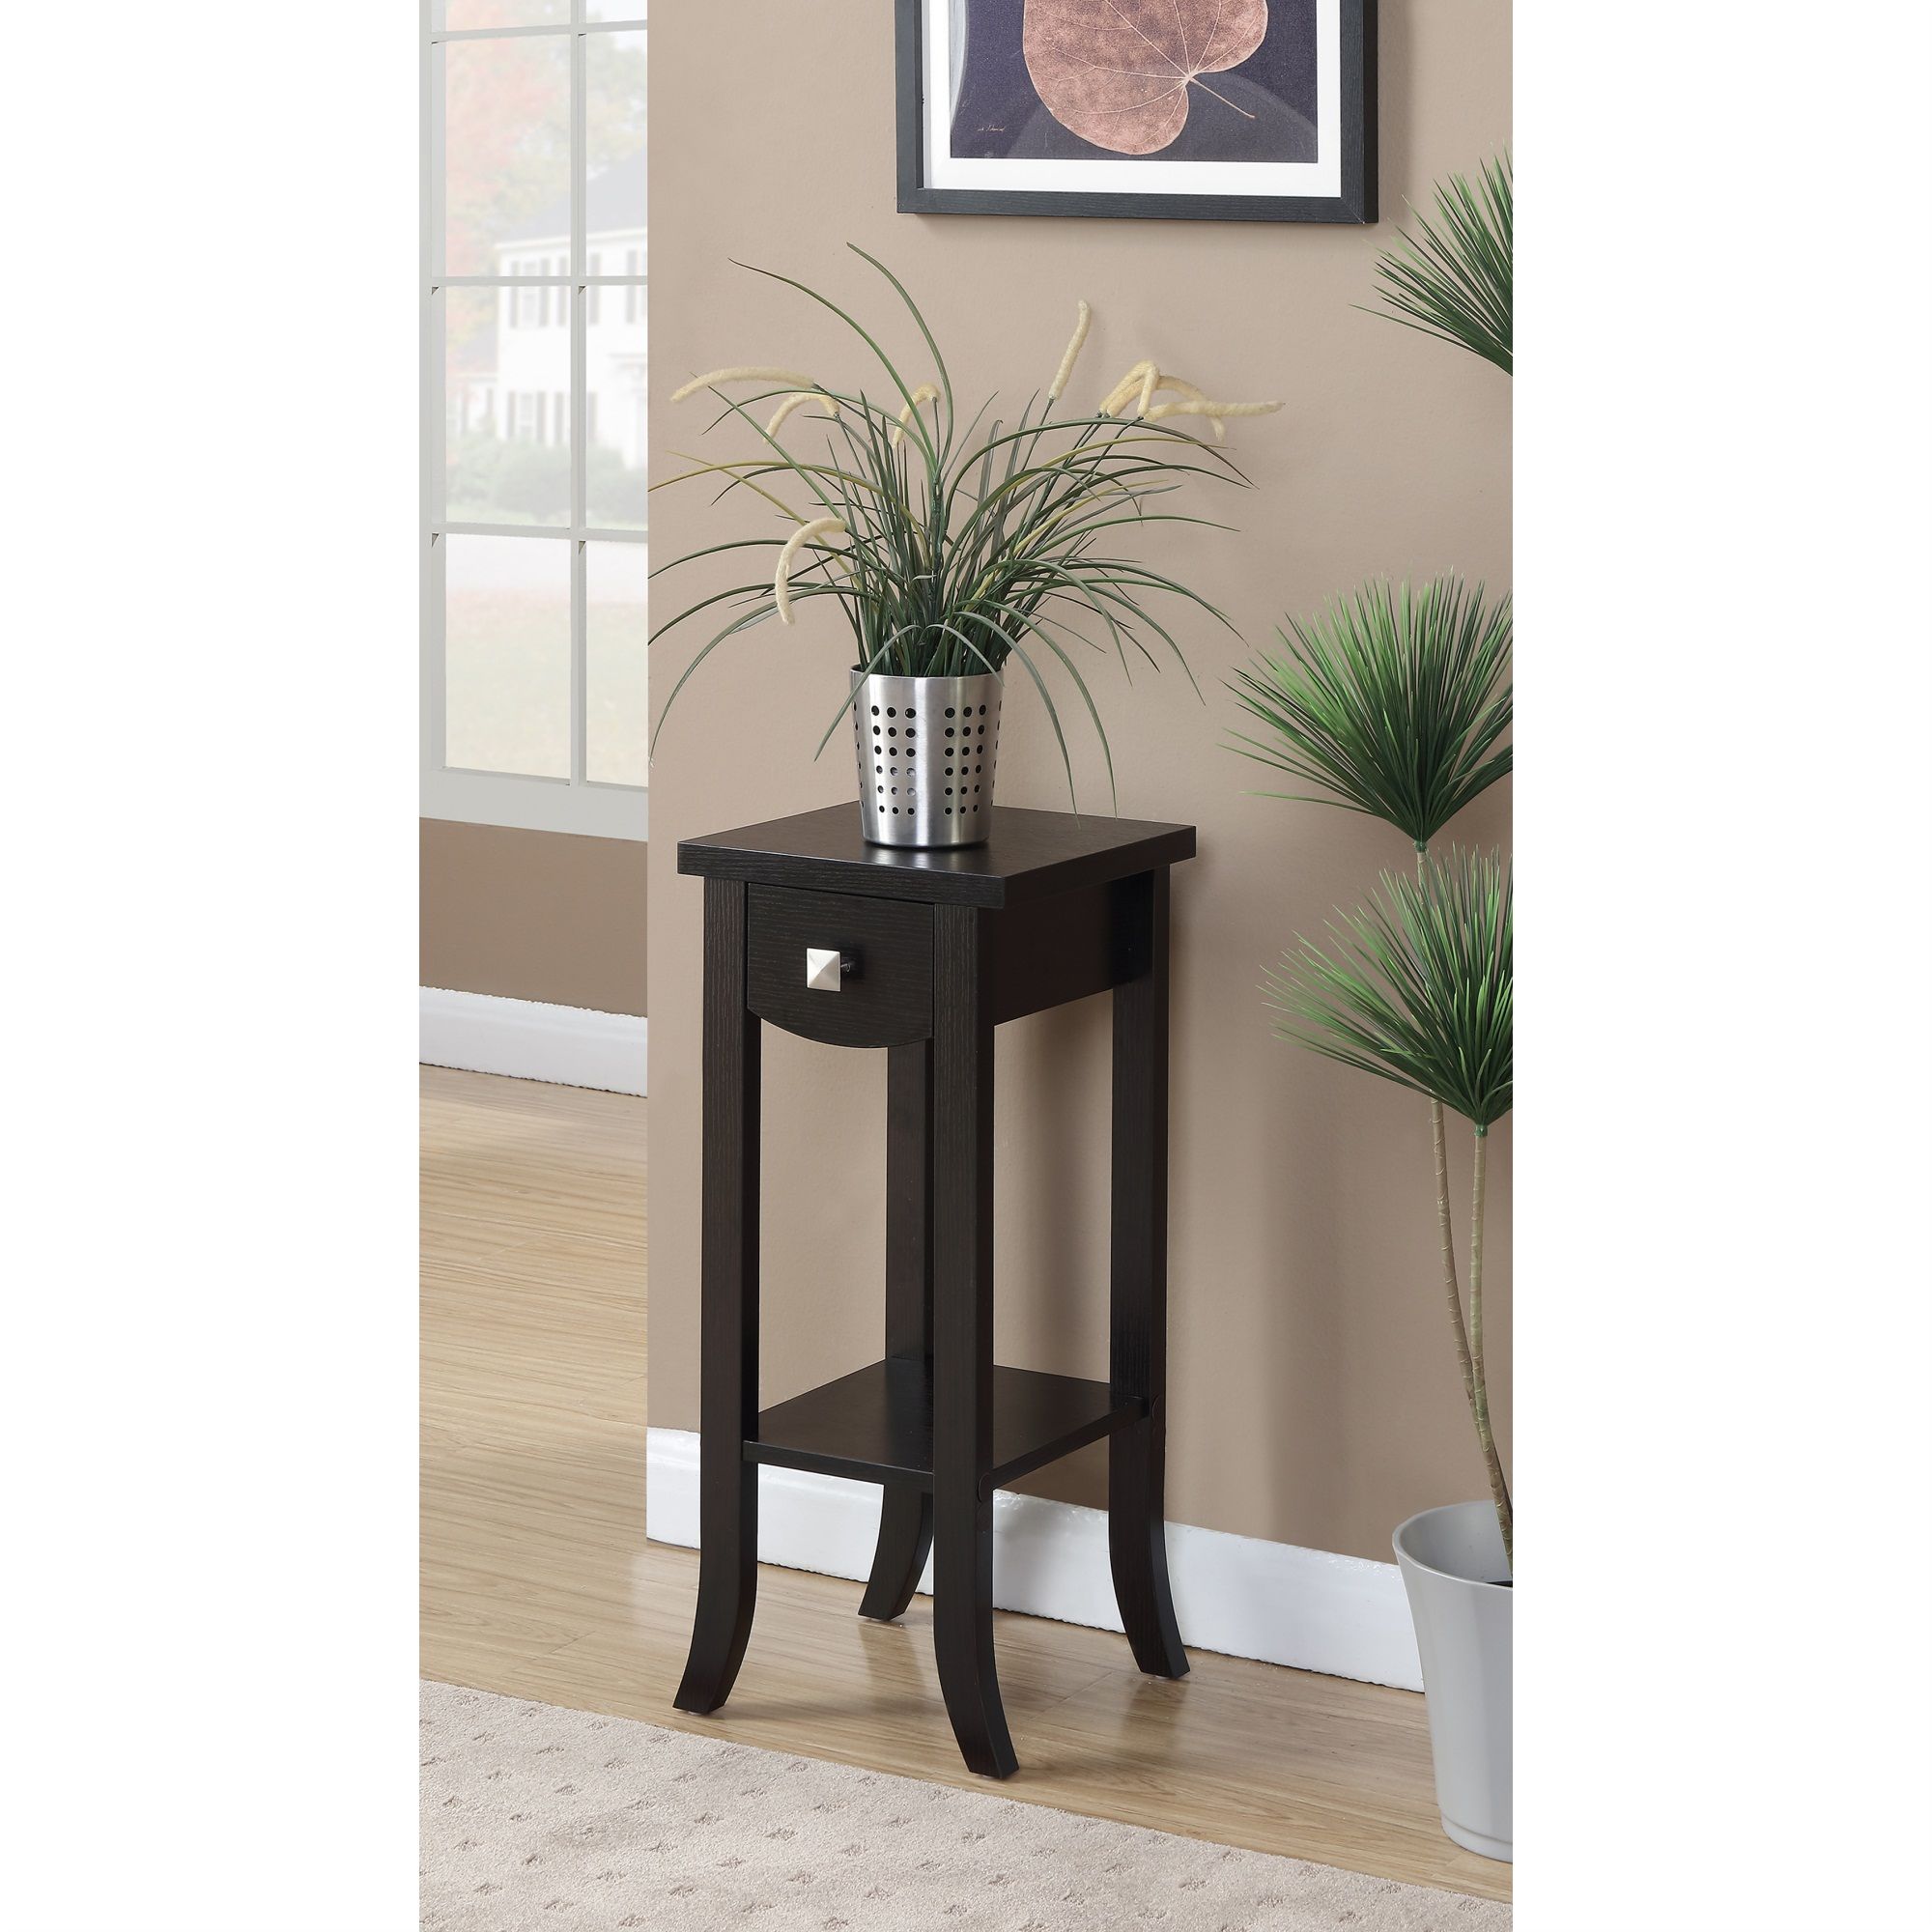 Newport Prism Medium Plant Stand – Walmart With Regard To Prism Plant Stands (View 1 of 15)